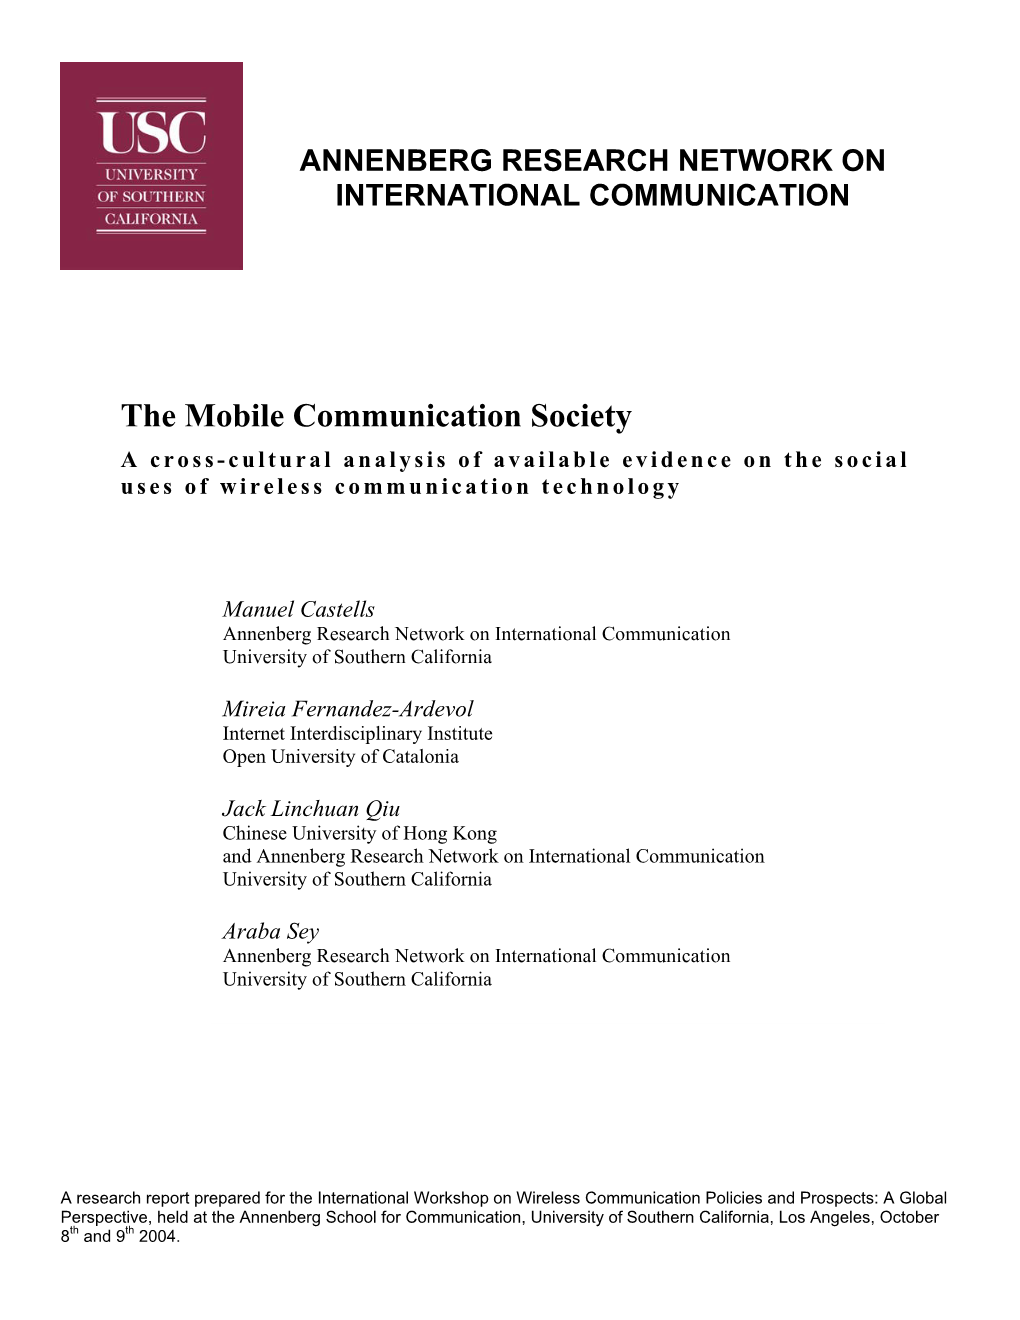 The Mobile Communication Society